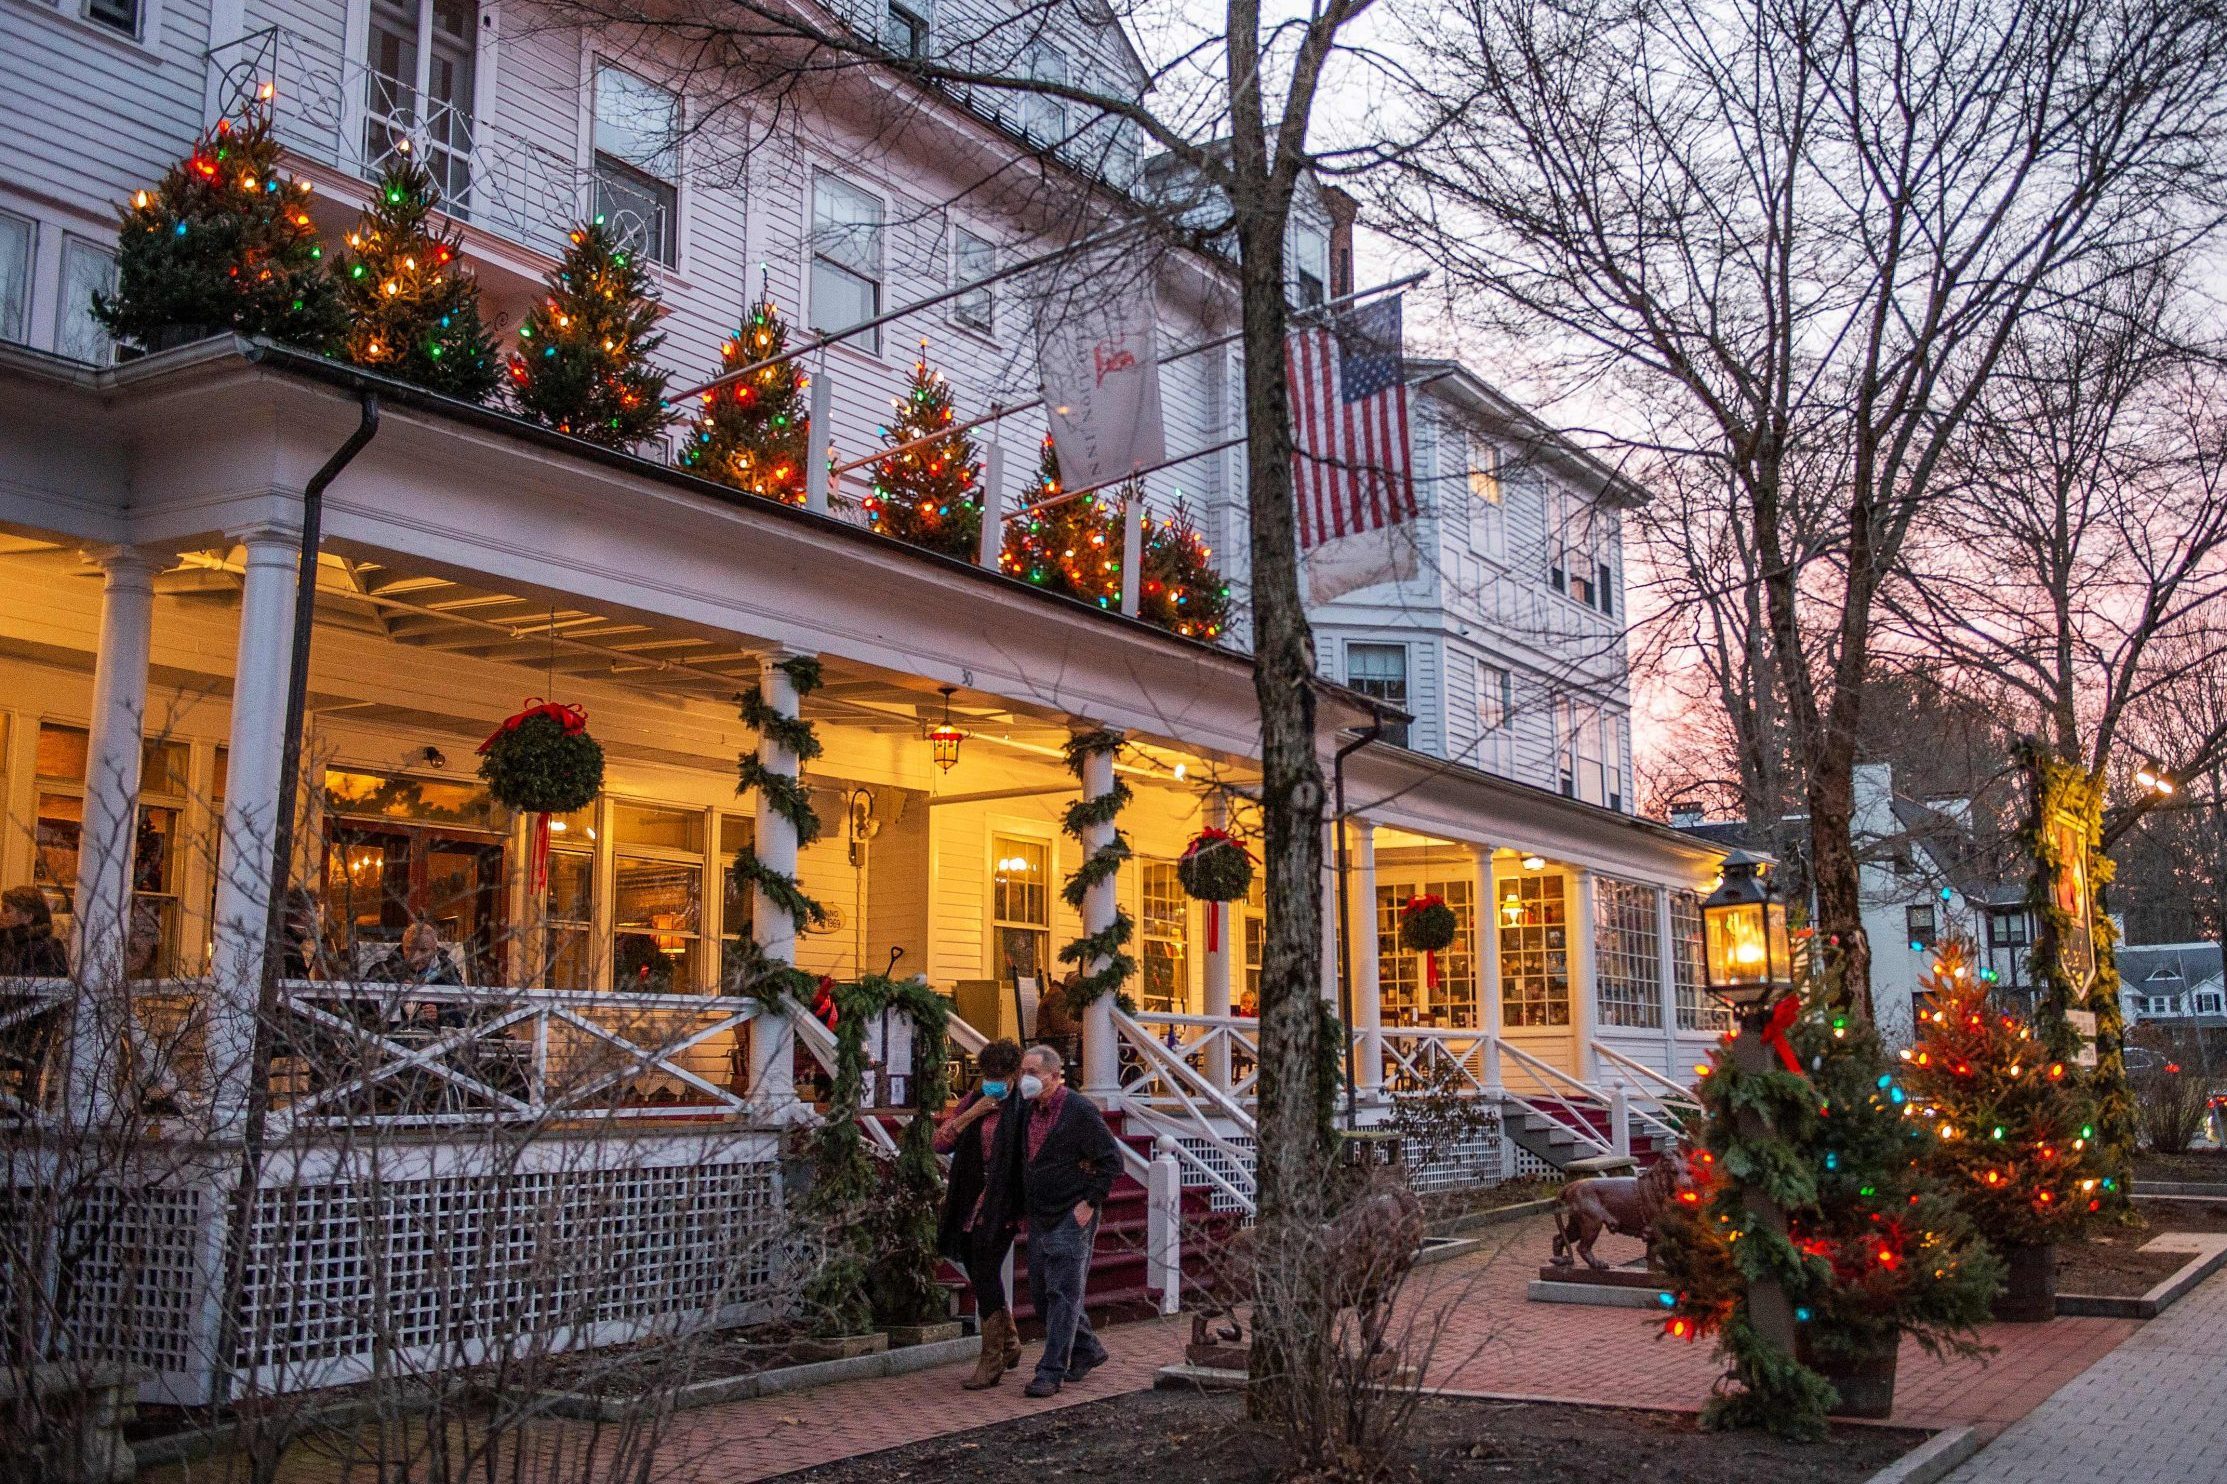 <p><strong>Best for:</strong> A Norman Rockwell Christmas</p> <p>Step into a Norman Rockwell painting, literally: The buildings of this New England small town are just as they were when Rockwell lived here, and as he depicted them in his 1967 painting "Main Street at Christmas." As you stroll through this village in the Berkshires Mountains, enjoy holiday shopping and decorations. Other seasonal activities include a holiday marketplace at the Berkshire Botanical Gardens, and several outdoor lights displays including Winterlights at historic home Naumkeag and NightWood at The Mount, author Edith Wharton's home. To see more of the artist's work, visit the Norman Rockwell Museum in town.</p> <p>Just a few miles up the road from Stockbridge is The Black Swan Lee, a boutique yet affordable hotel on the banks of Laurel Lake. Relax in the tranquil, snowy setting as you gaze over October Mountain State Park, where you can take advantage of all the outdoor winter activities the Berkshires have to offer.</p> <p class="listicle-page__cta-button-shop"><a class="shop-btn" href="https://www.tripadvisor.com/Hotel_Review-g41636-d1146989-Reviews-The_Black_Swan_Lee_Lenox_Ascend_Hotel_Collection-Lee_Massachusetts.html">Book Now</a></p>